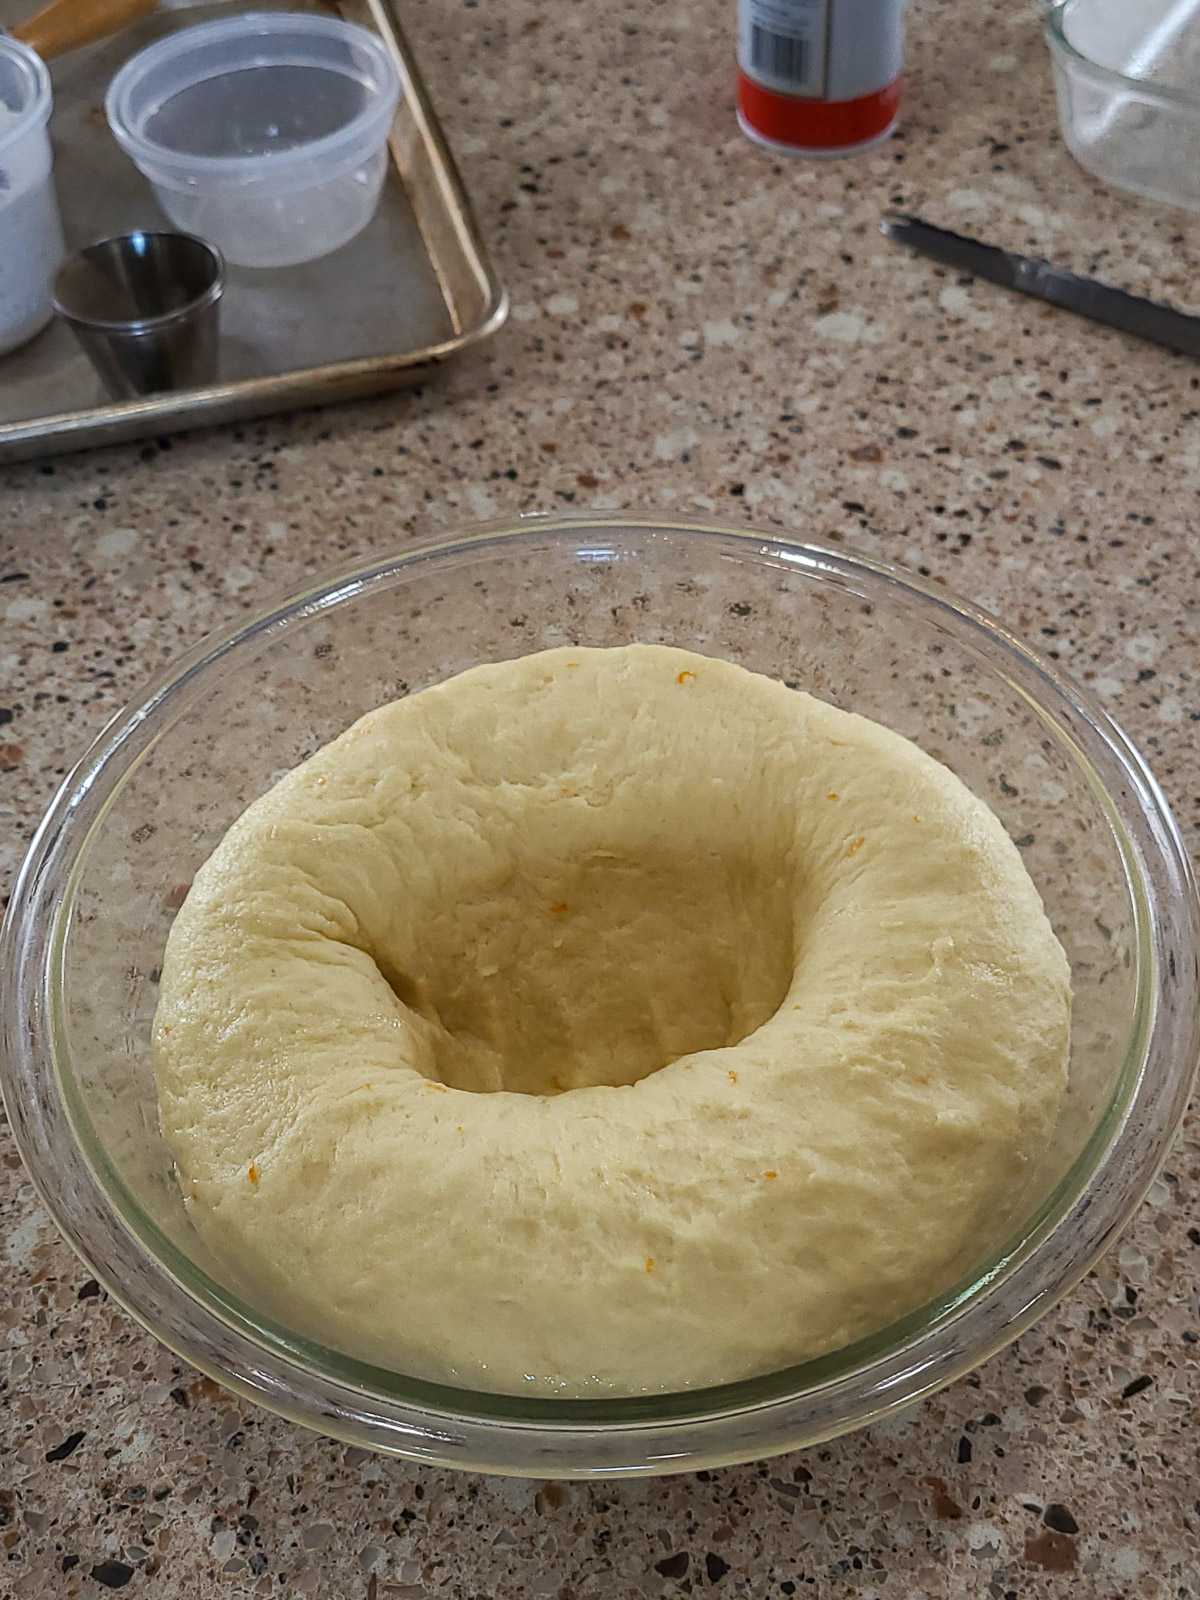 raised dough being punched down in a bowl